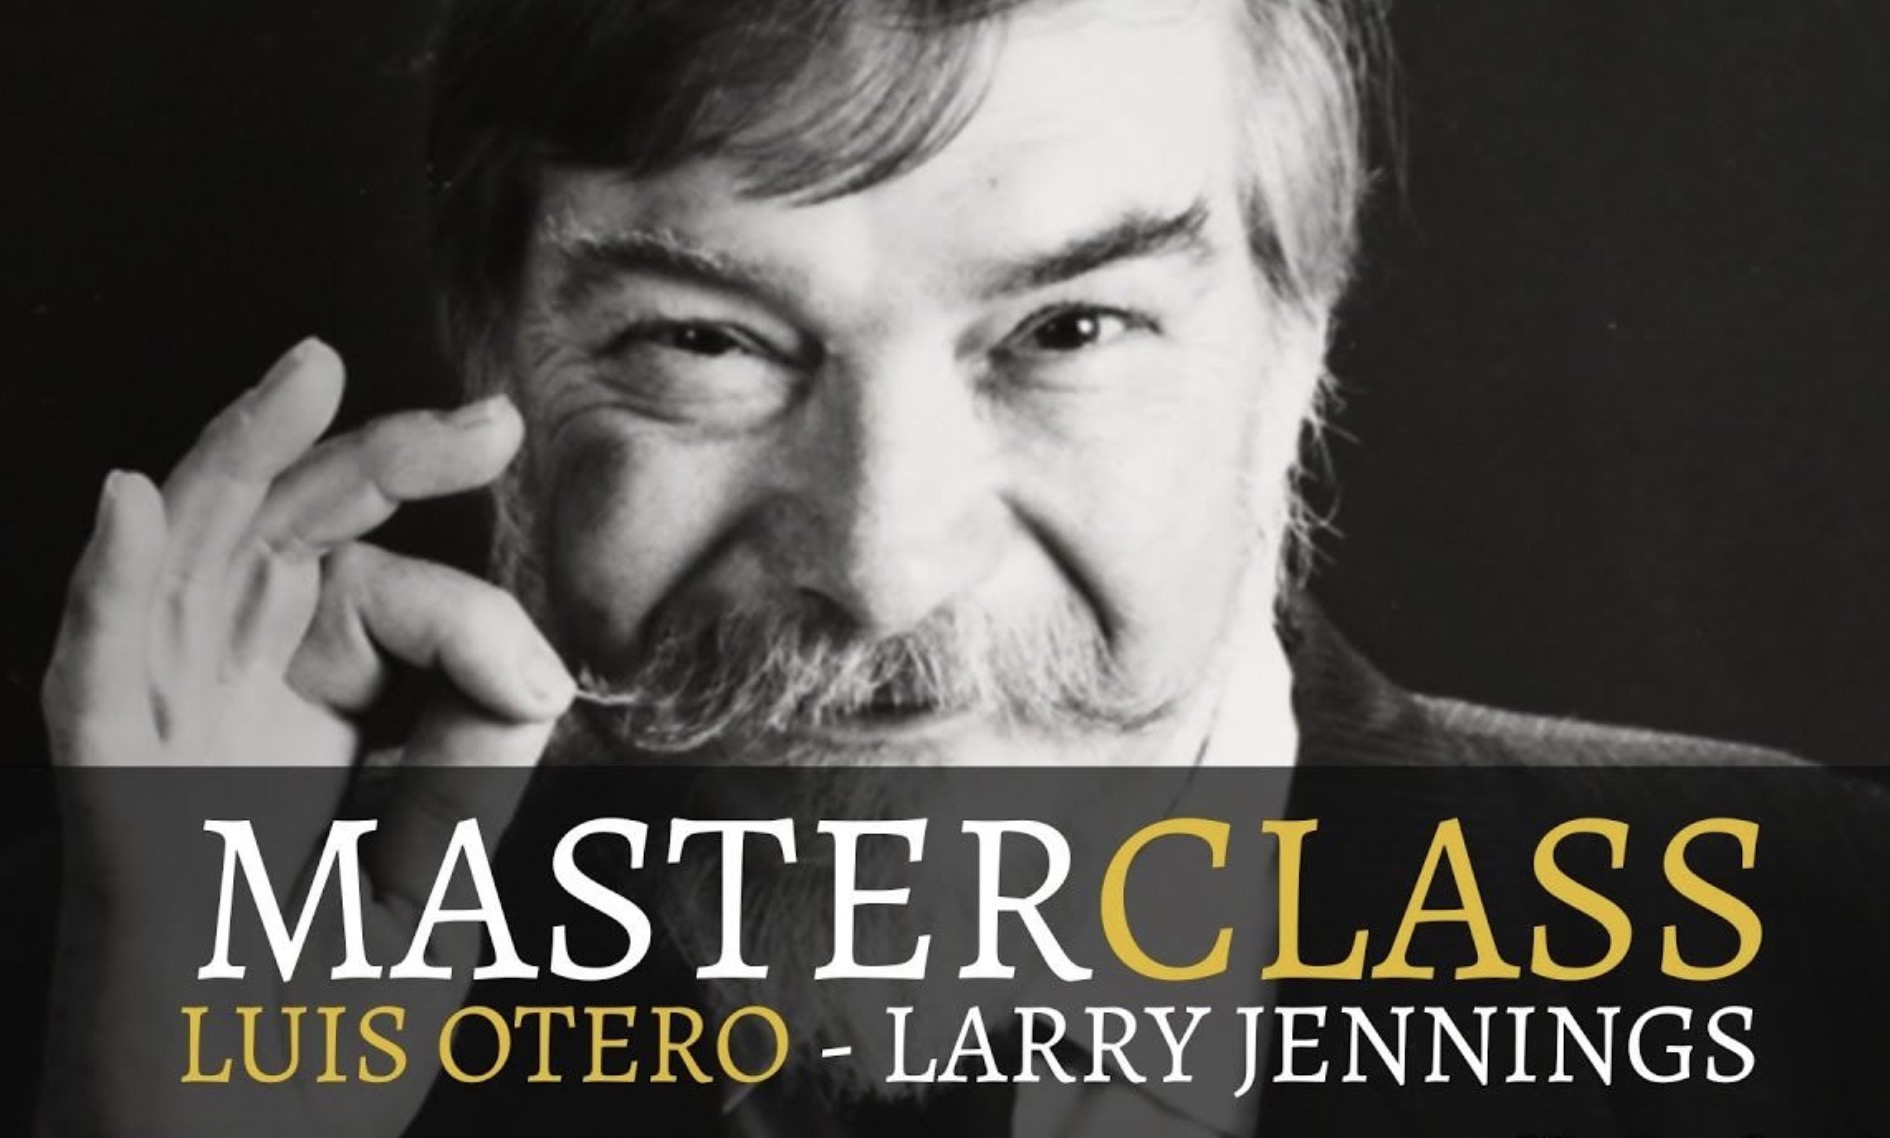 Masterclass Larry Jennings x Luis Otero (Mp4 Video Download 720p High Quality, not in English)